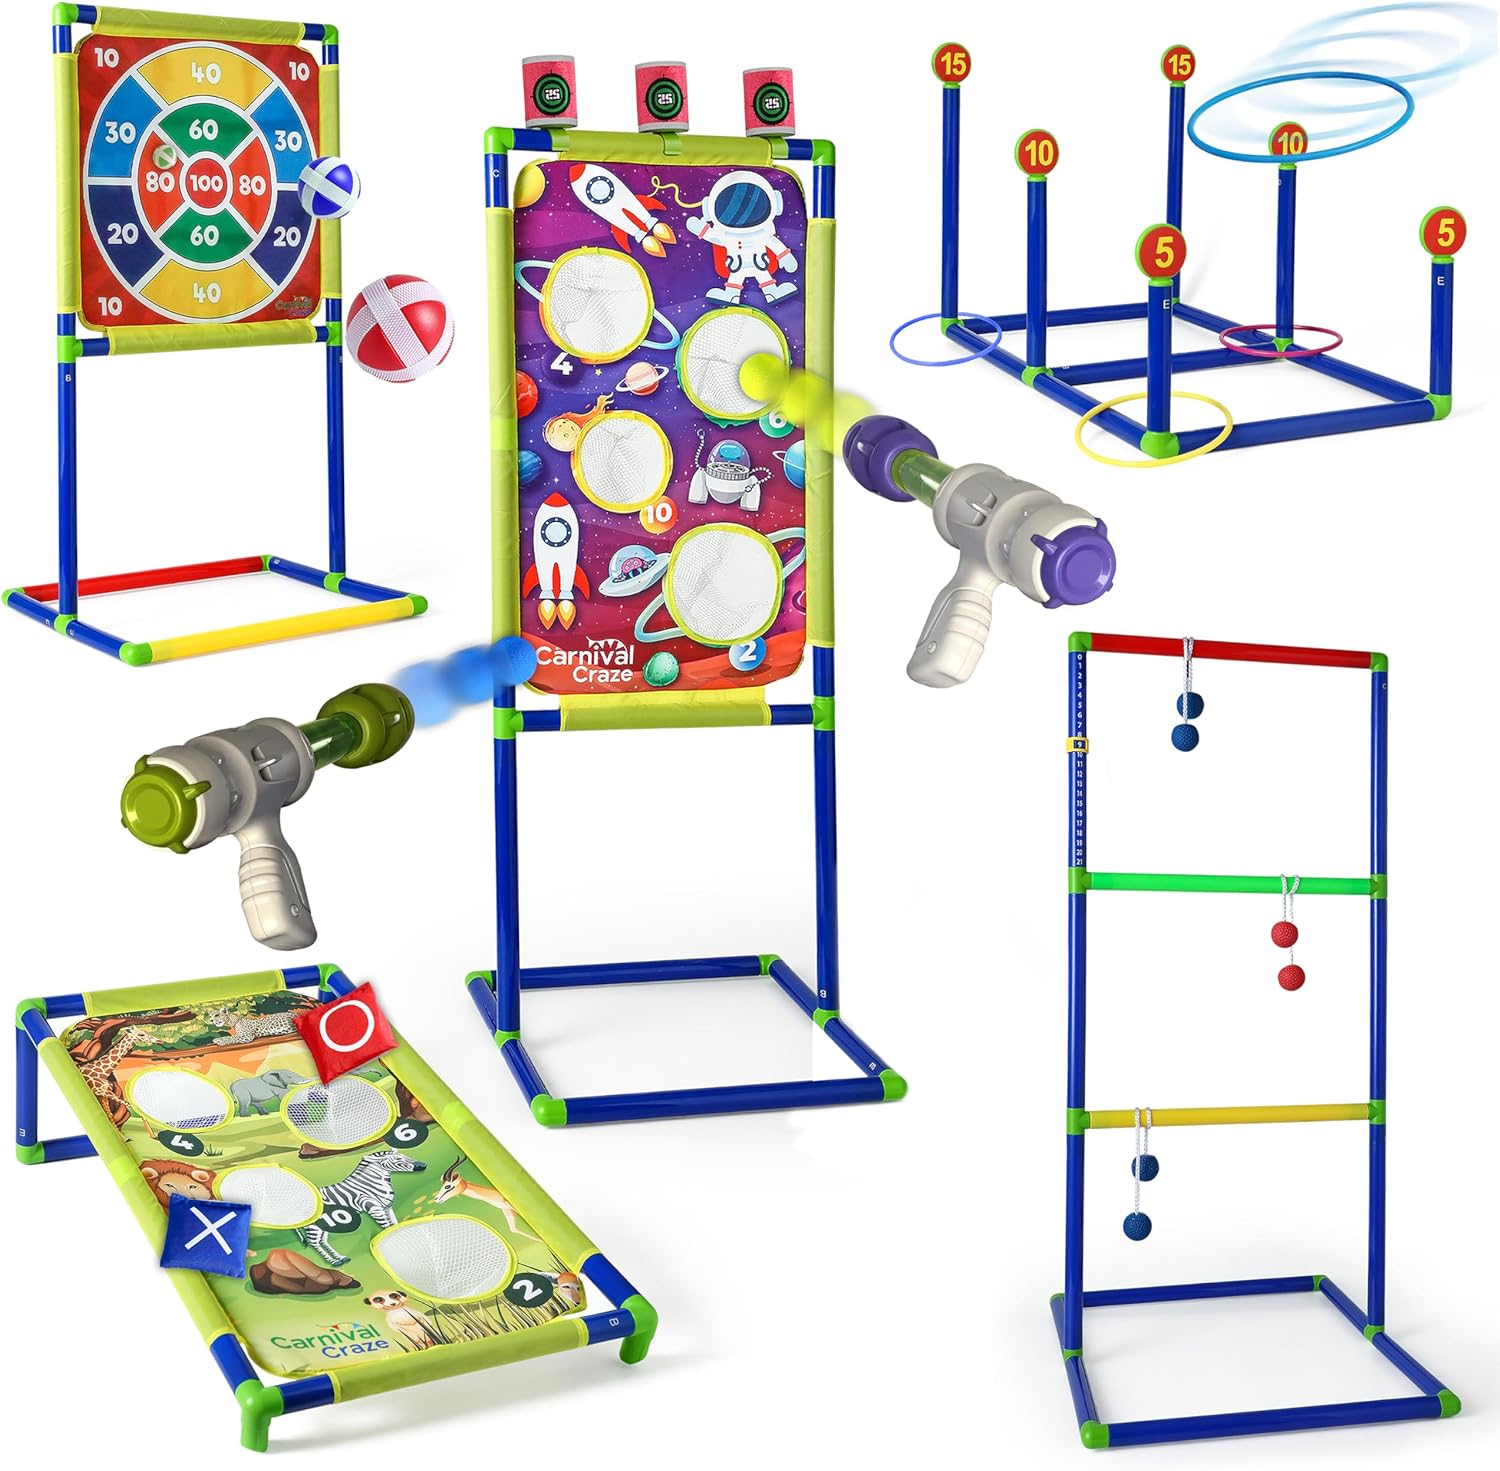 Carnival Games for Kids – Yard Games Include: Ring Toss, Beanbag, Ball Shooting Target Game, Ladder Toss, Darts Board, Tic Tac Toe, Birthday Party Activities, Portable Backyard Outdoor Games for Kids